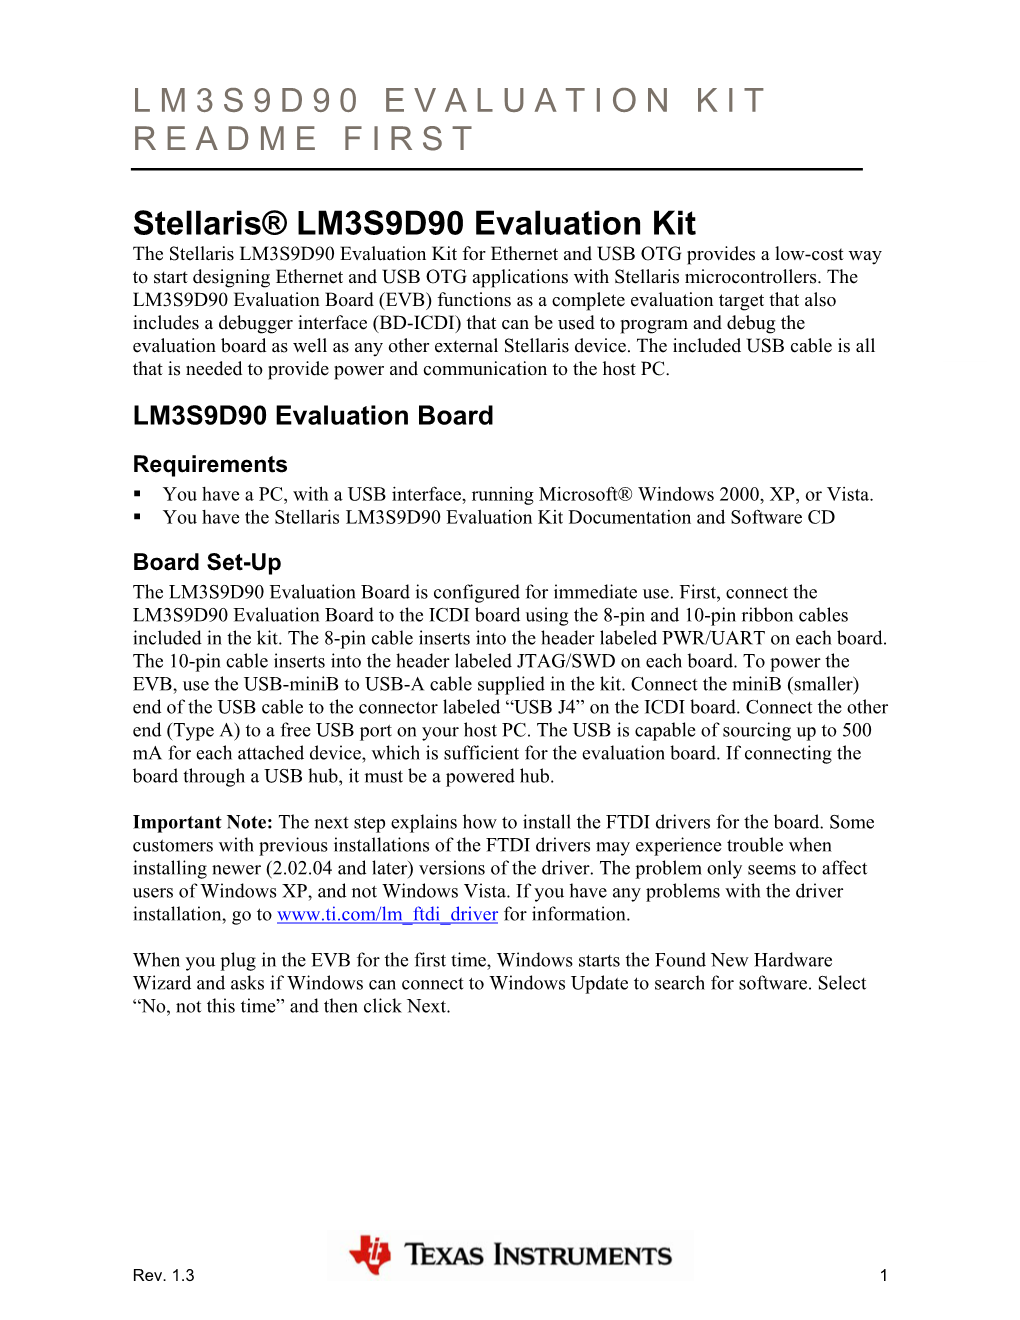 Stellaris LM3S9D90 Evaluation Board Readme First